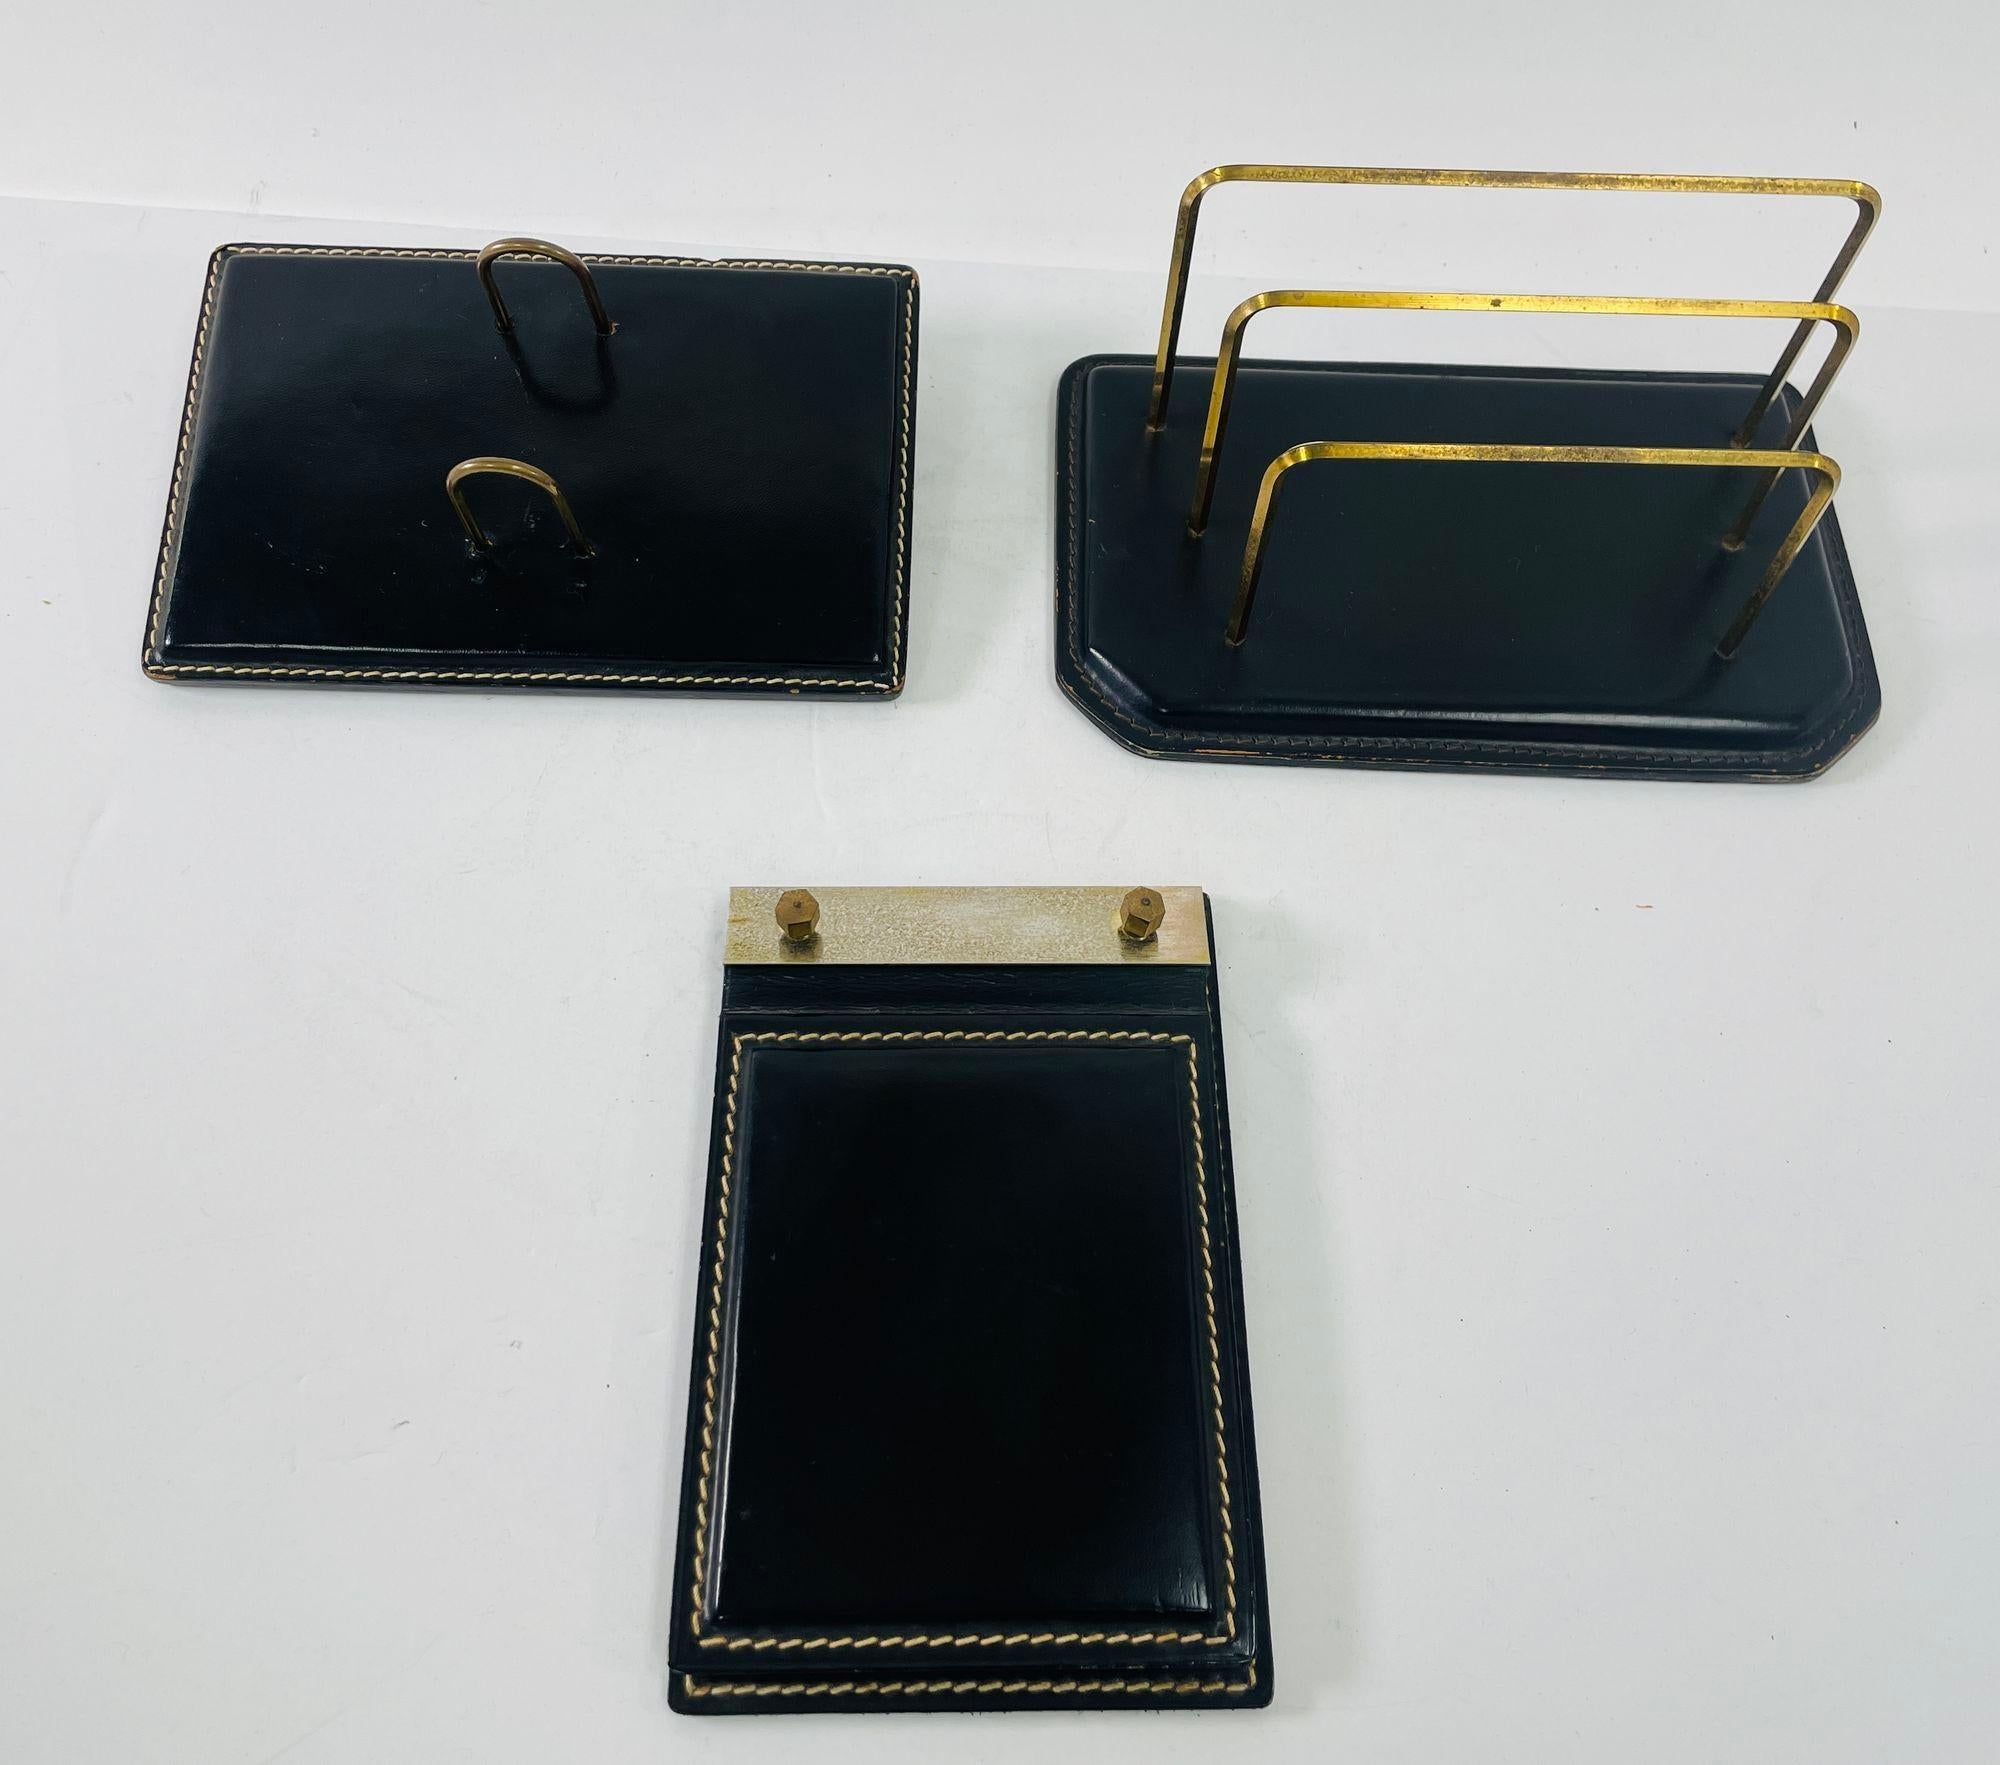 Vintage Jacques Adnet style Art Deco black leather saddle stitching with metal brass desk set.
A modernist desk accessories set designed by ILG, Belgium, in the 1950s. 
Art Deco style desk set comprising of a black leather and brass letter desk